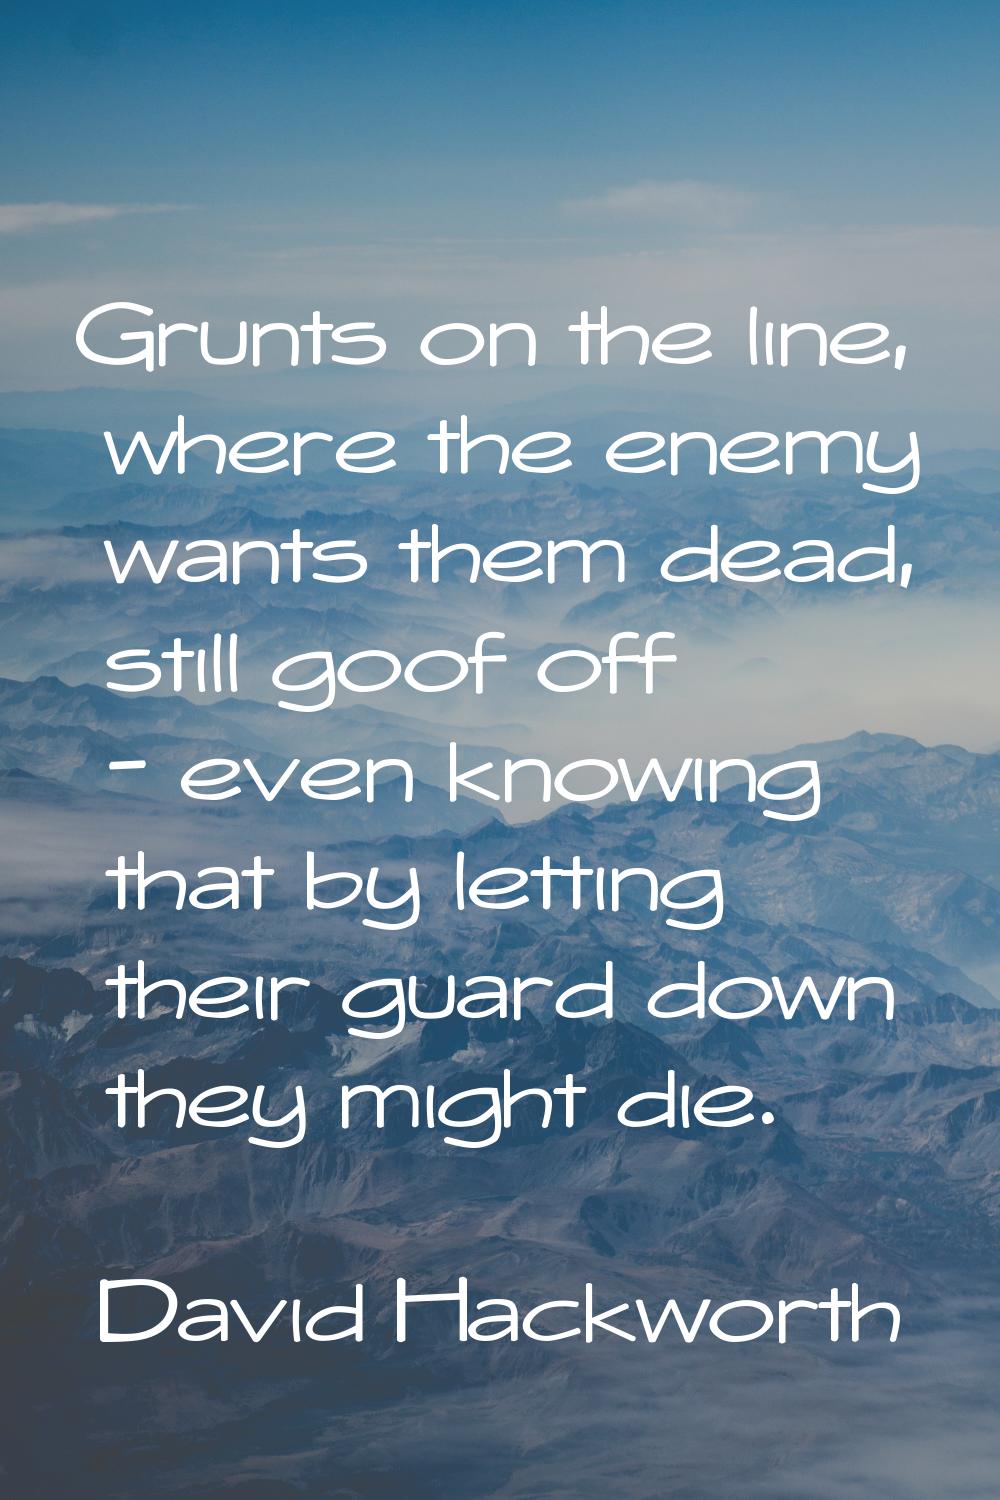 Grunts on the line, where the enemy wants them dead, still goof off - even knowing that by letting 